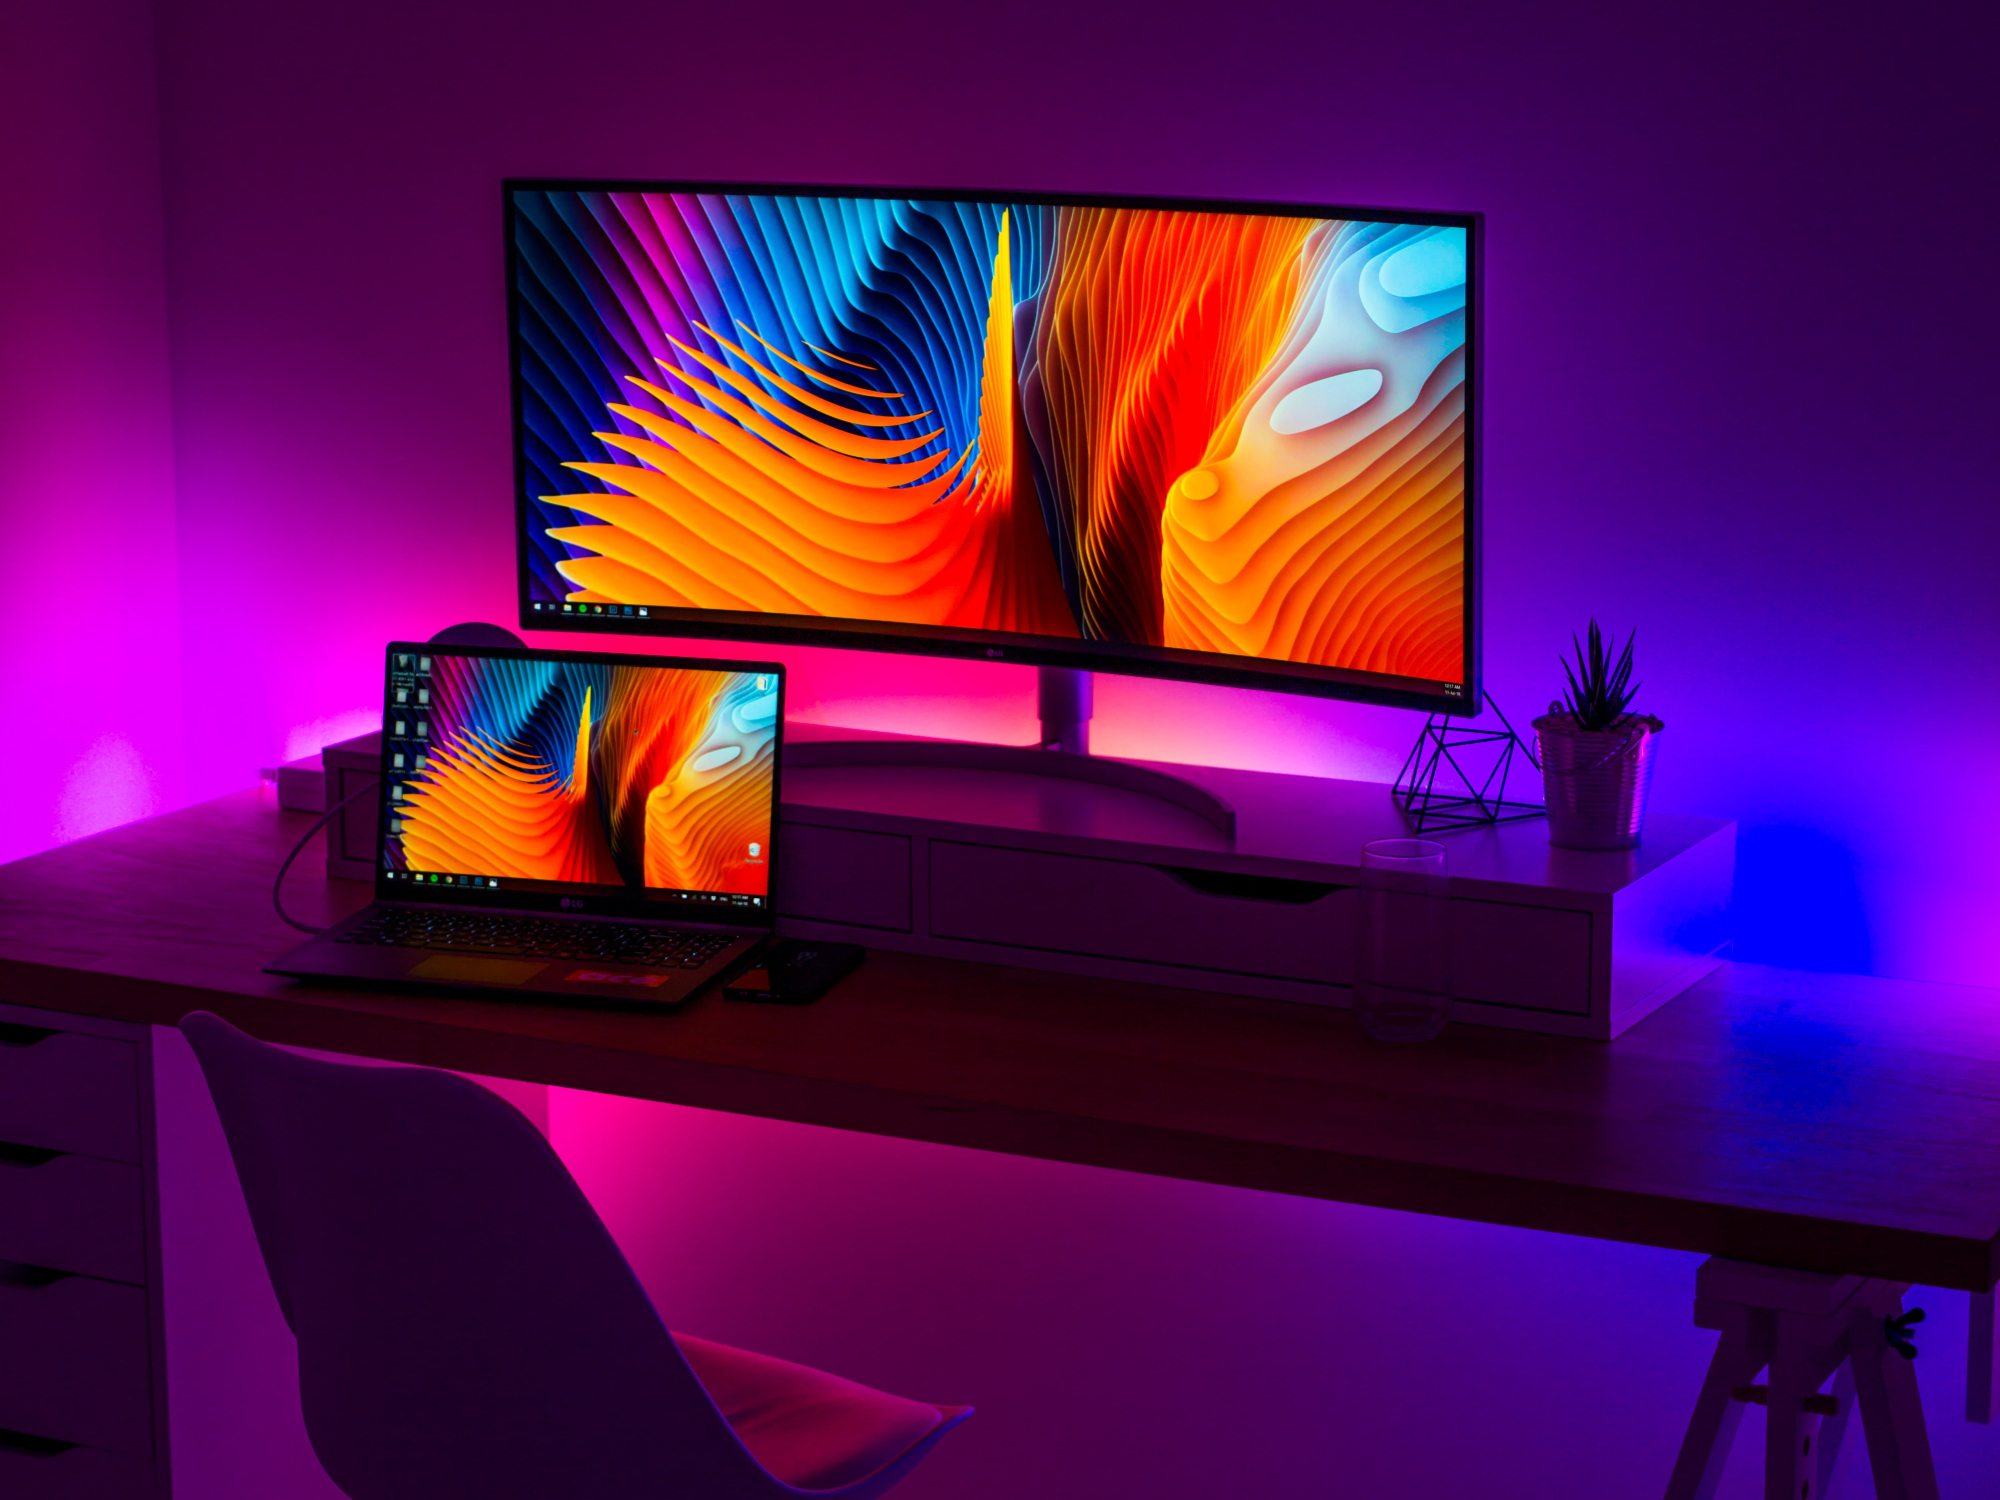 LED strip lights behind a computer desk, adding a purple glow to the room.